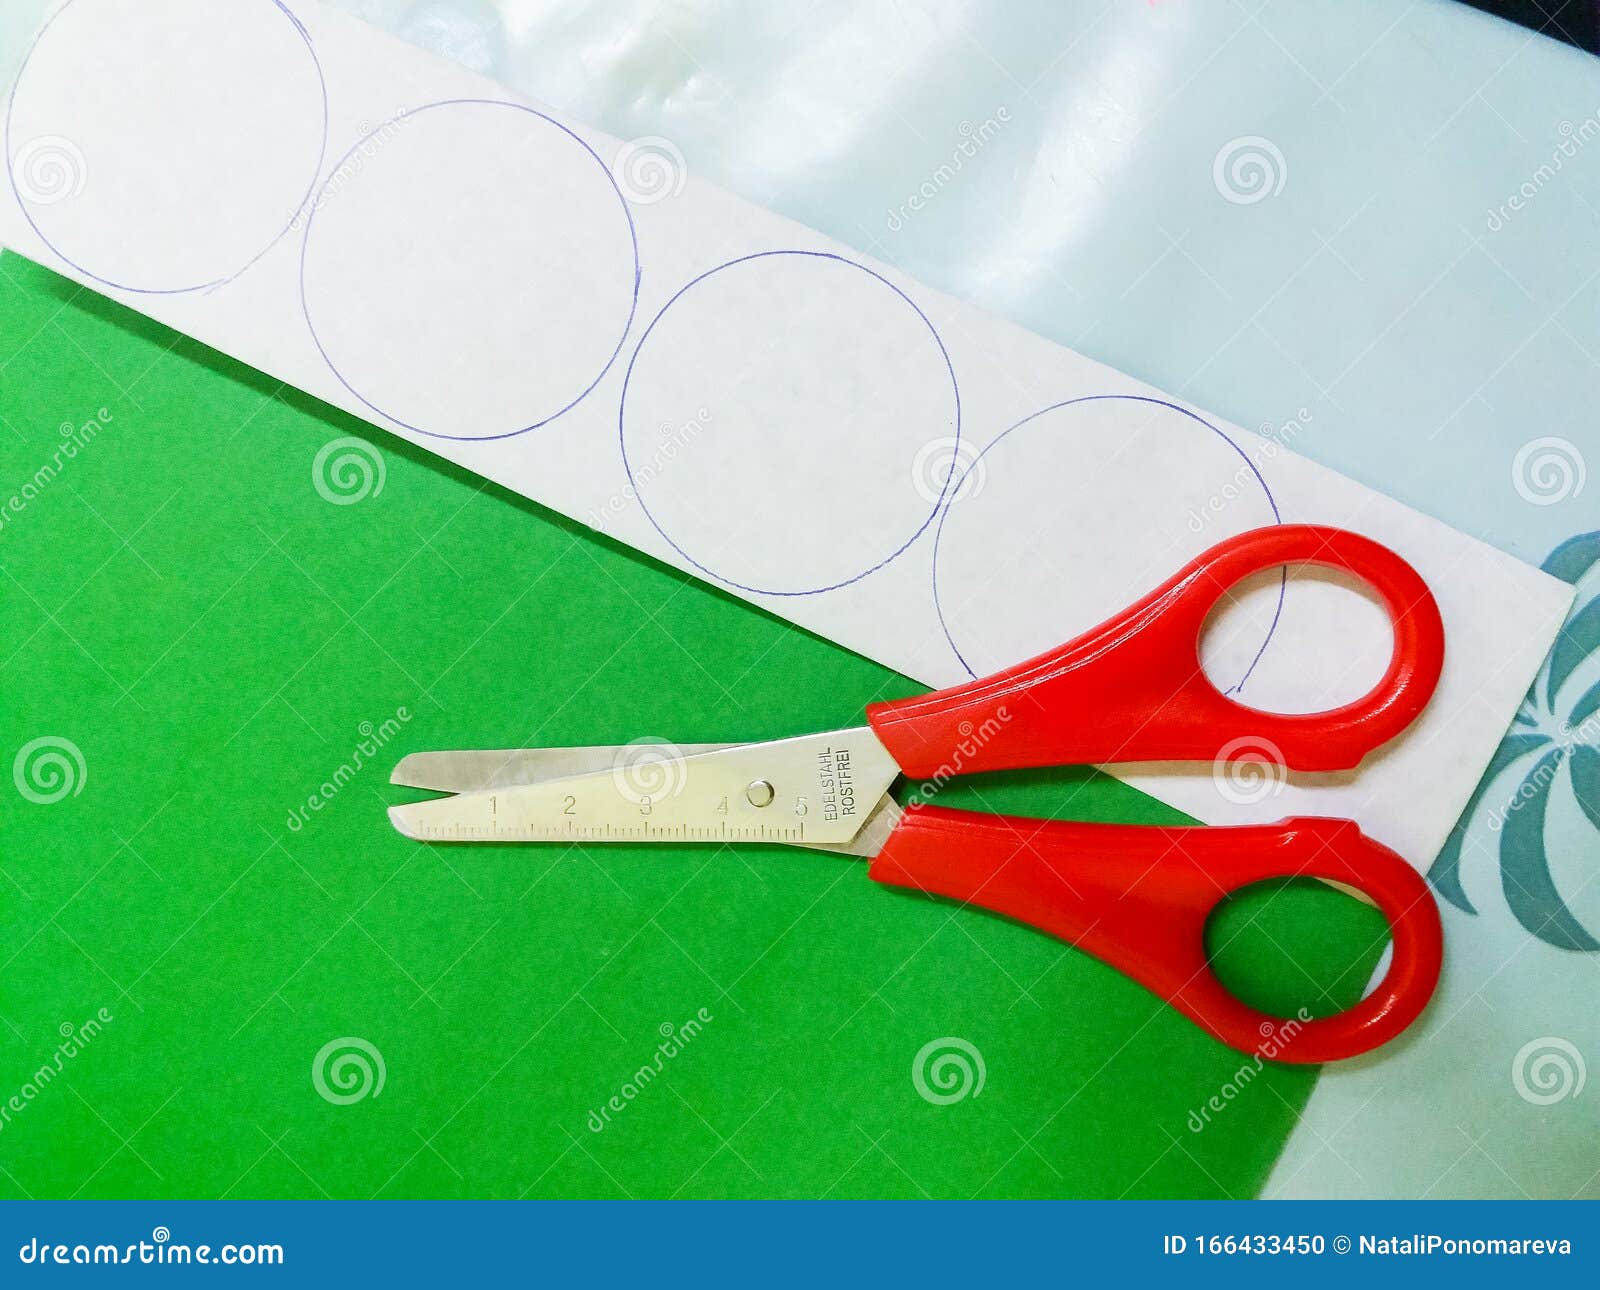 https://thumbs.dreamstime.com/z/make-crafts-children-circle-circles-new-years-garland-plastic-cap-large-bottle-year-s-scissors-divisions-166433450.jpg